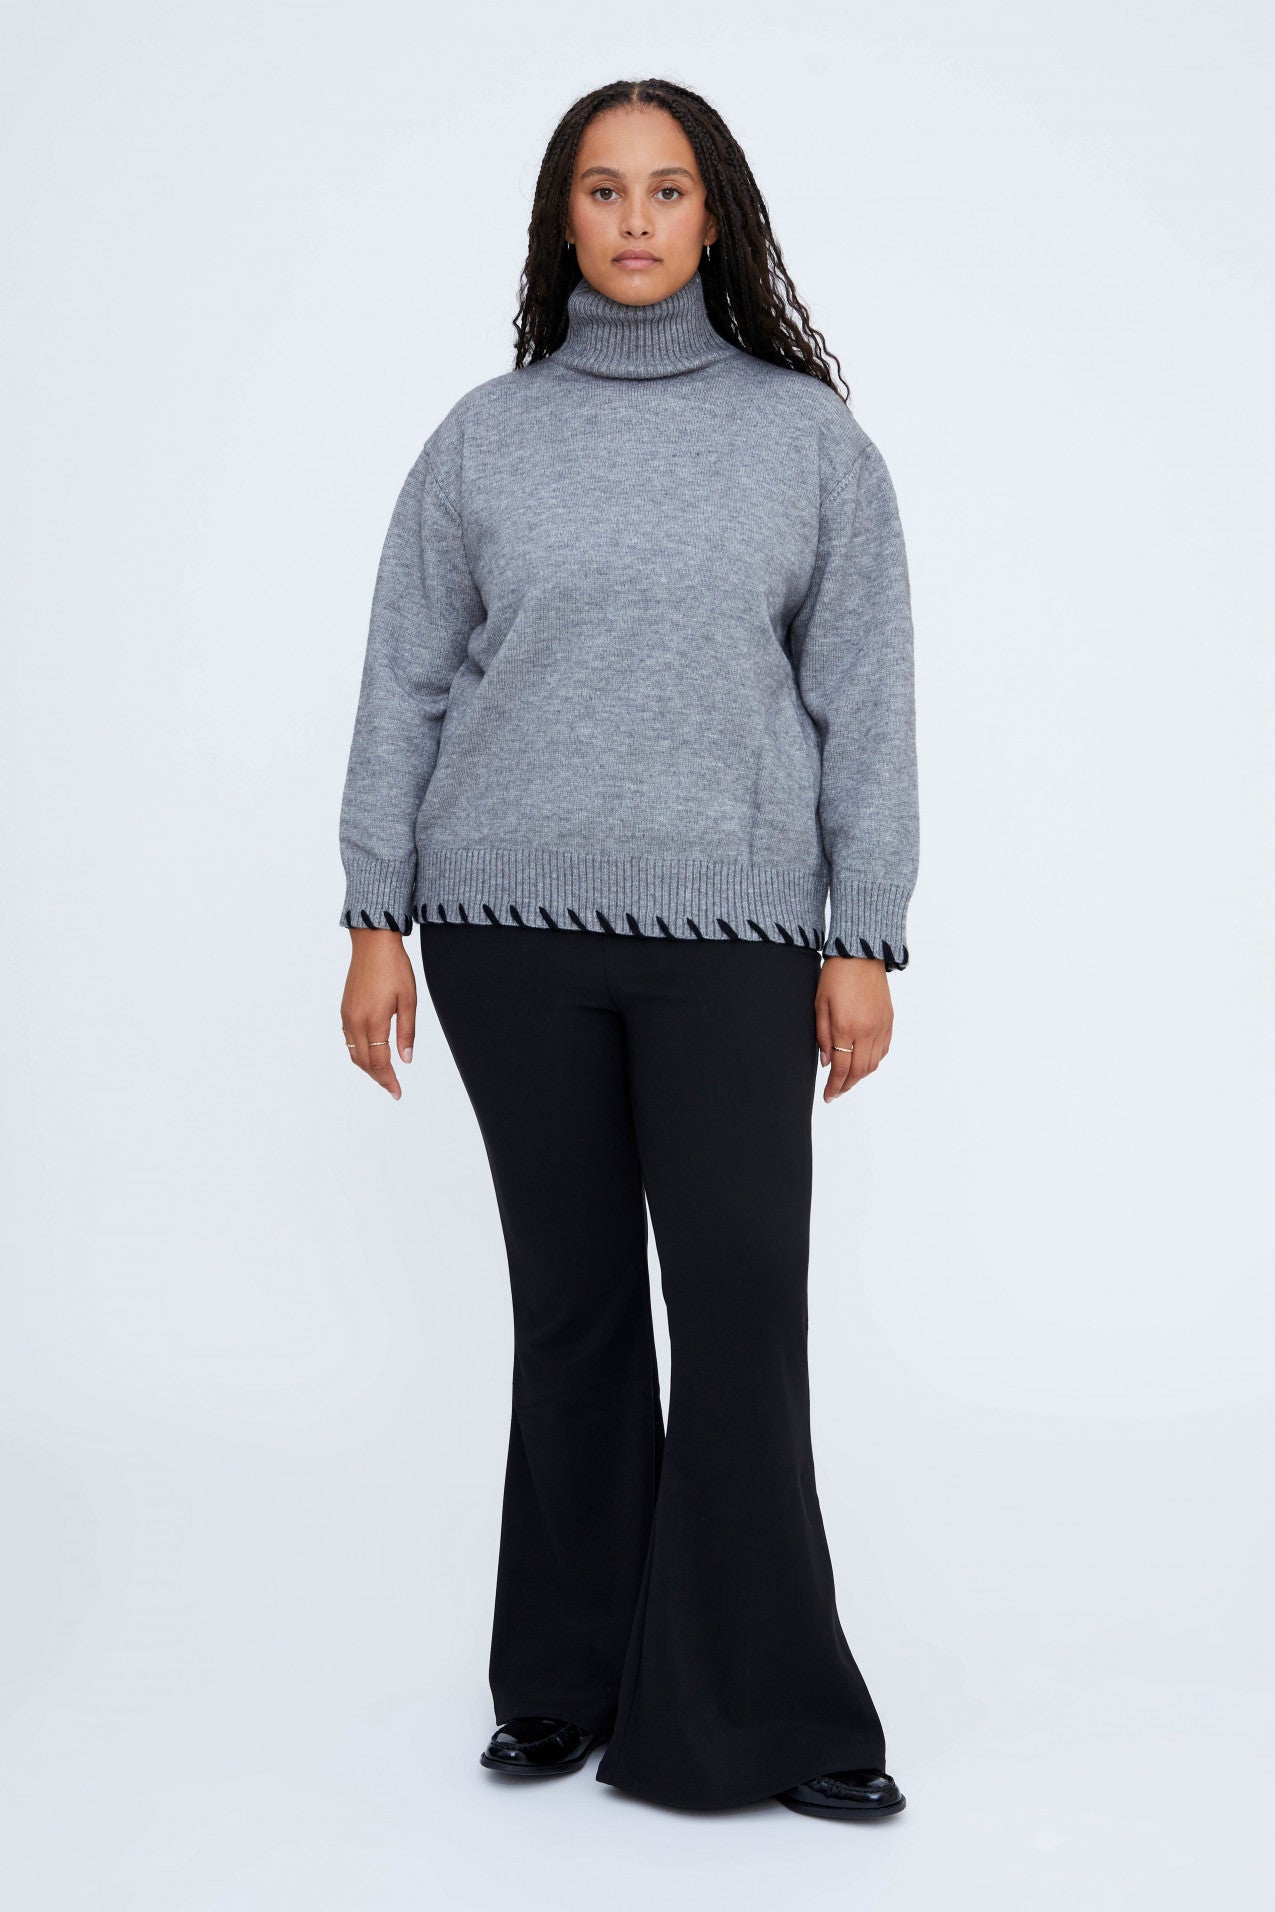 Gray Turtleneck Knitted Sweater